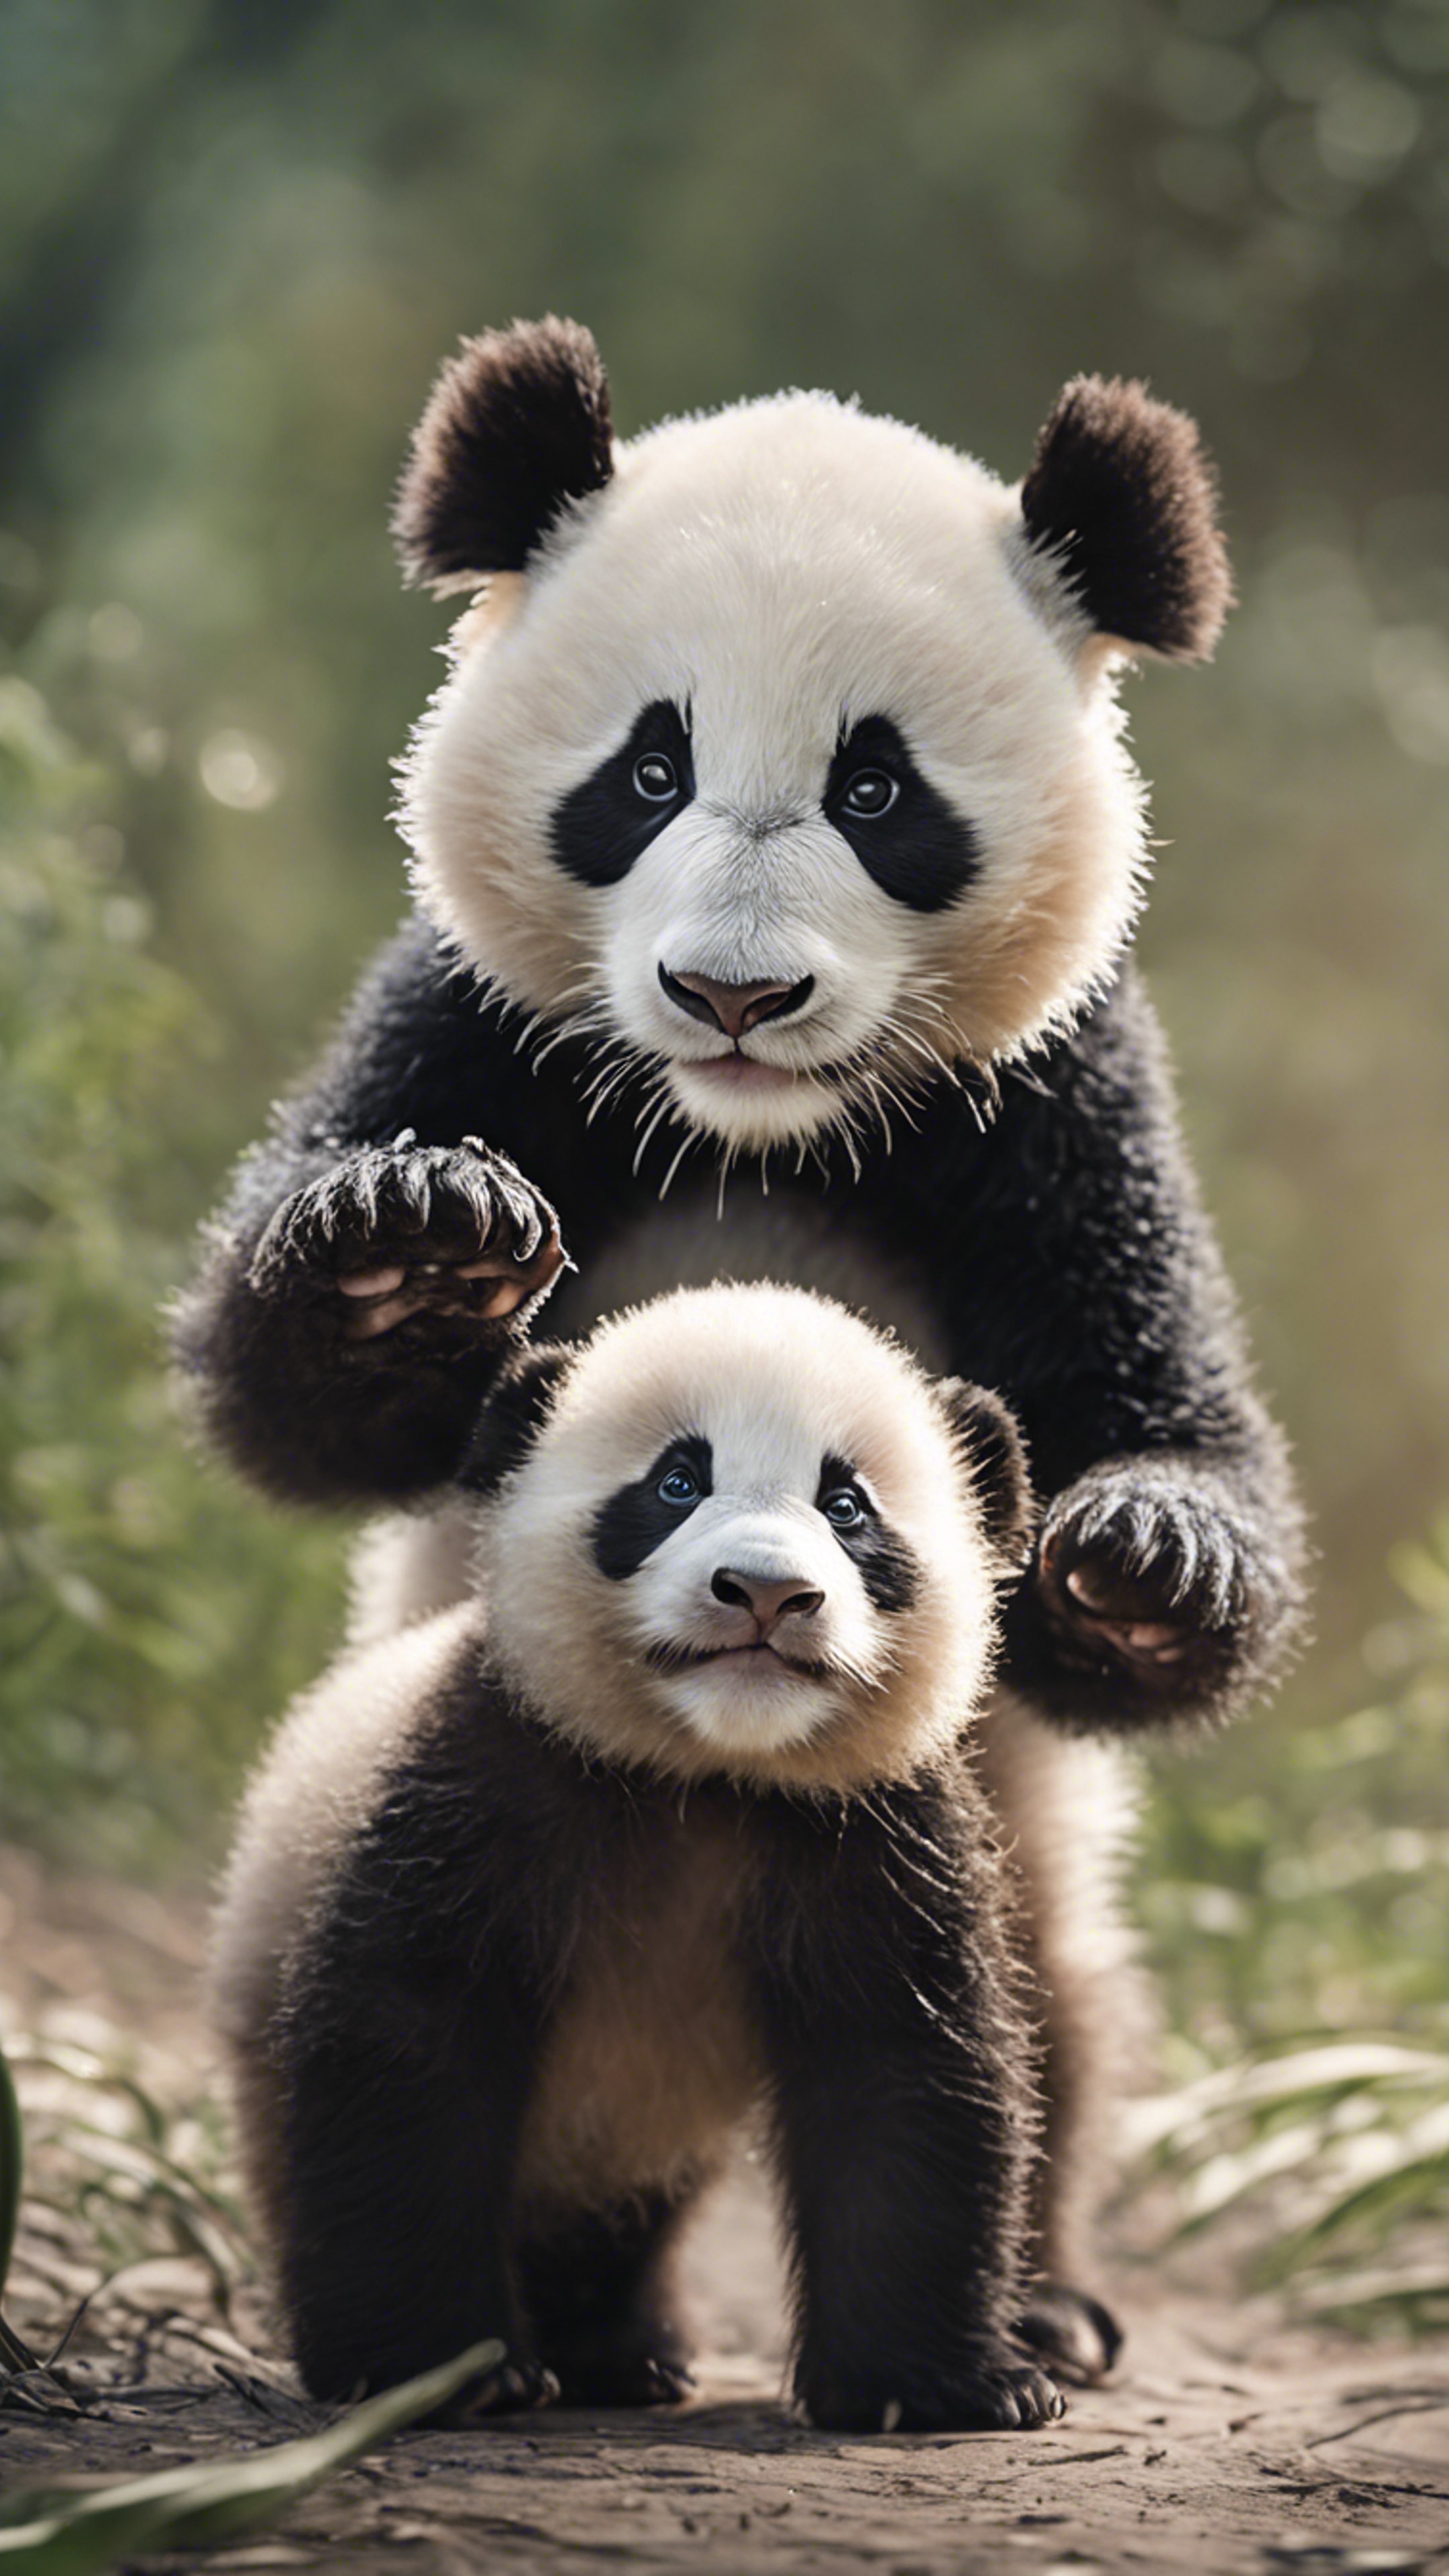 A newborn panda cub learning to walk, under the loving guidance of its mother. Tapet[d326db7fc4d14111aedf]